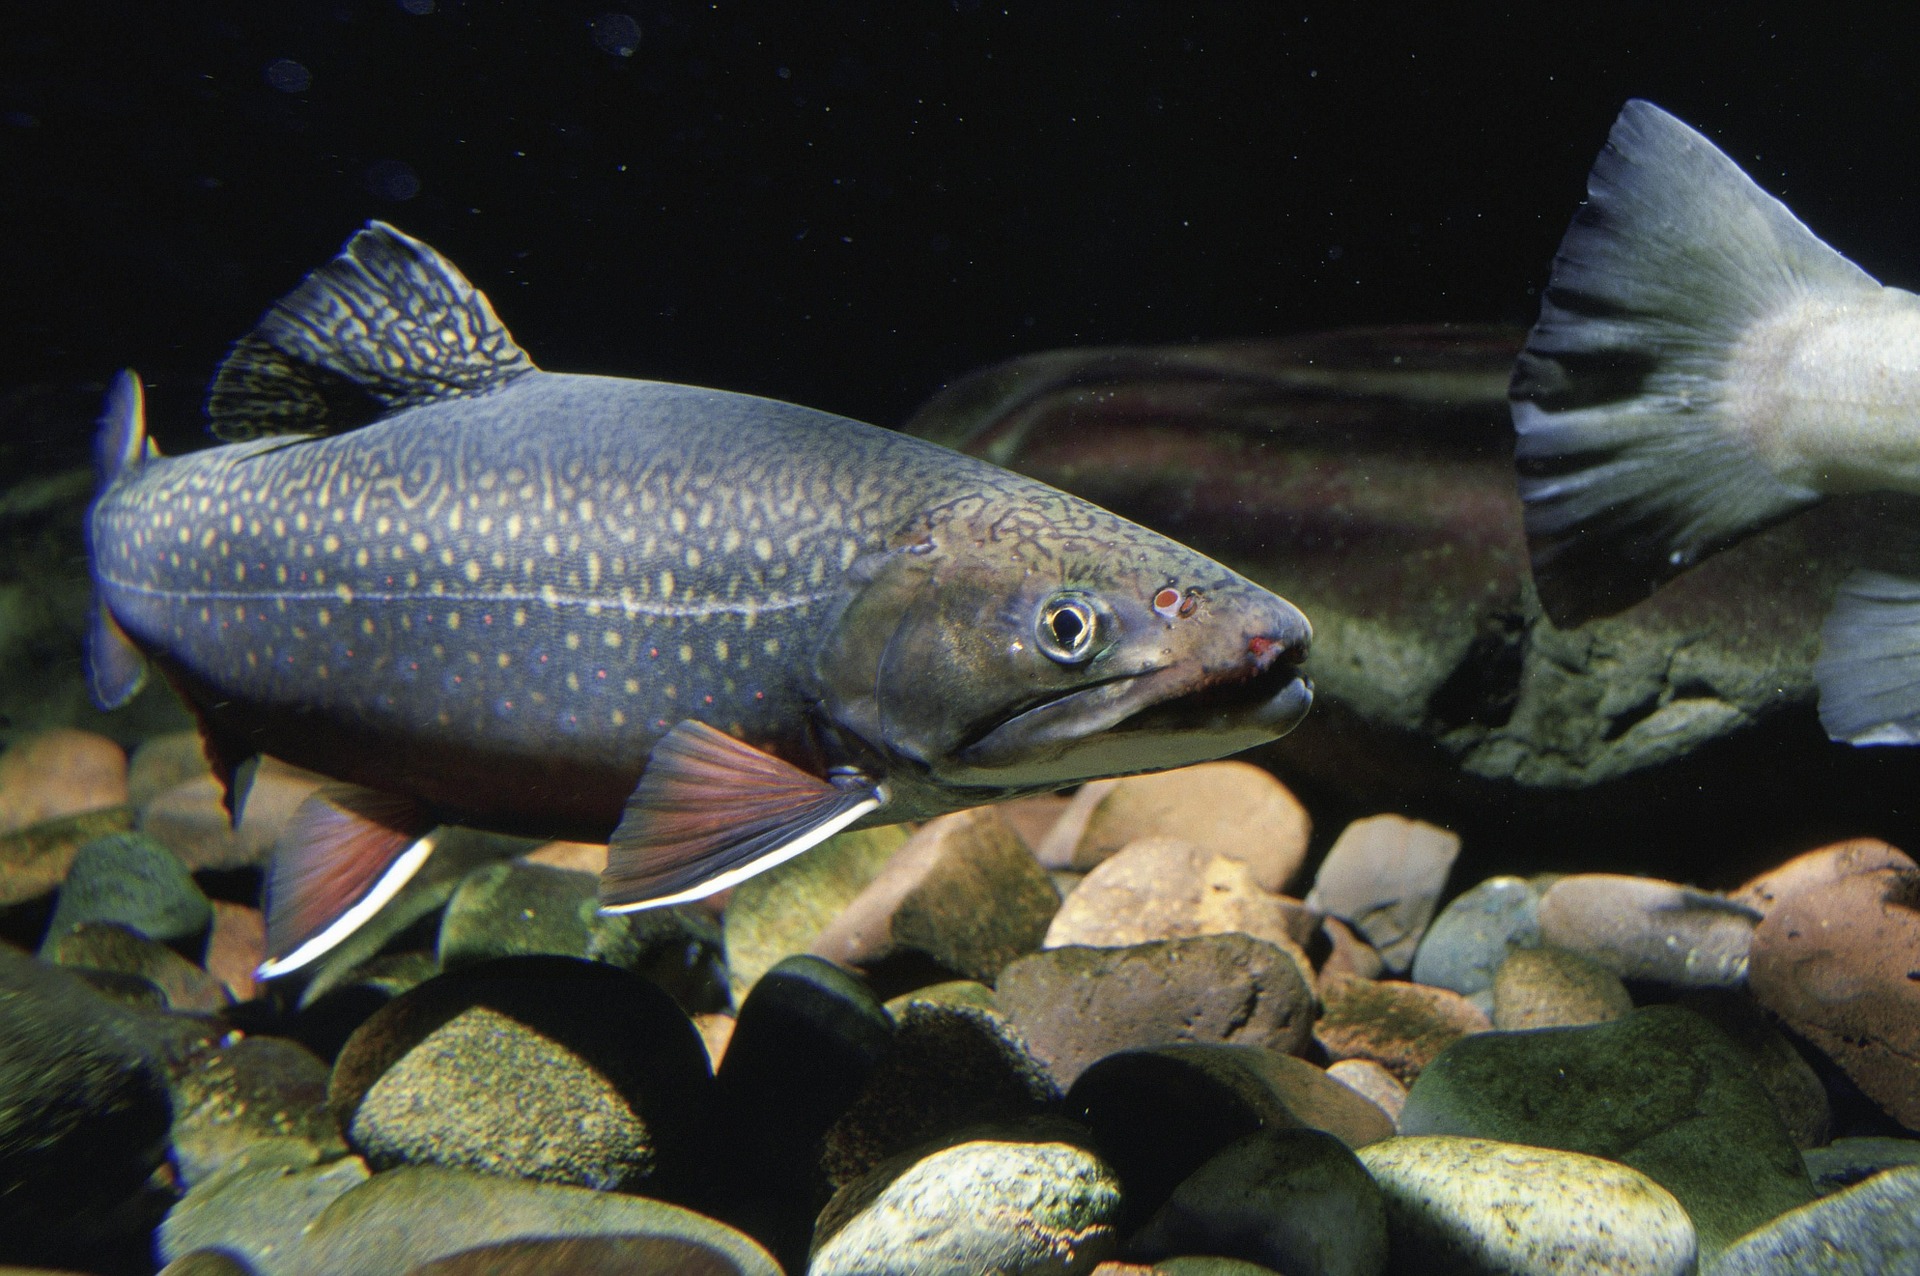 Brook trout are native to the eastern seaboard and midwest, but they have been widely introduced throughout the American West